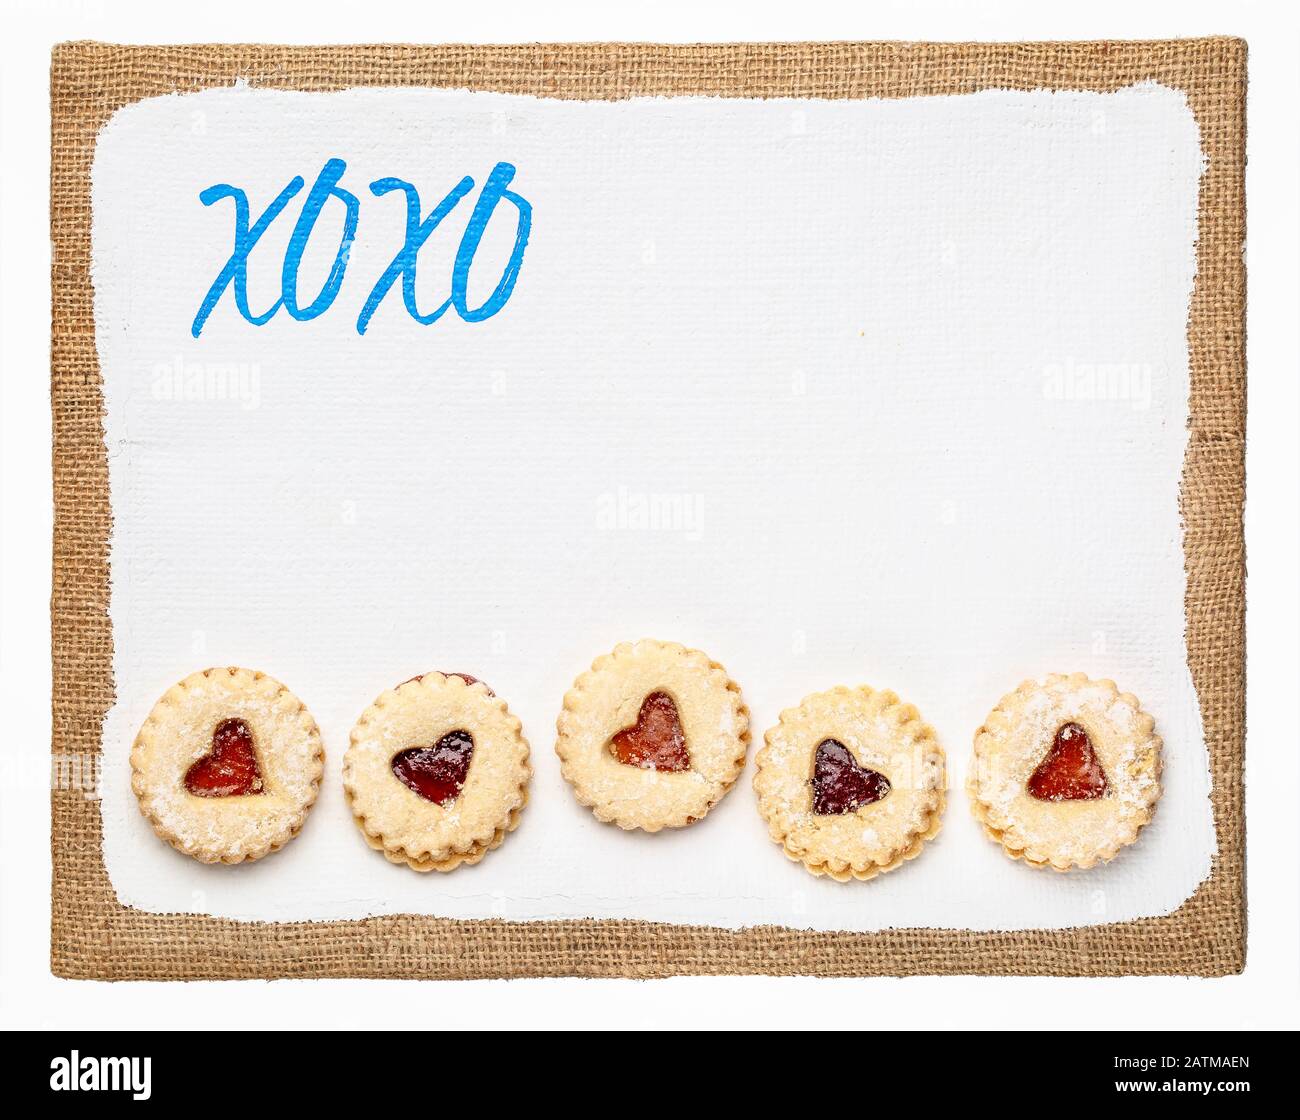 xoxo, hugs and kisses - expressing affection, sincerity, or deep friendship, handwriting on an art canvas with a row of heart cookies, love and Valent Stock Photo